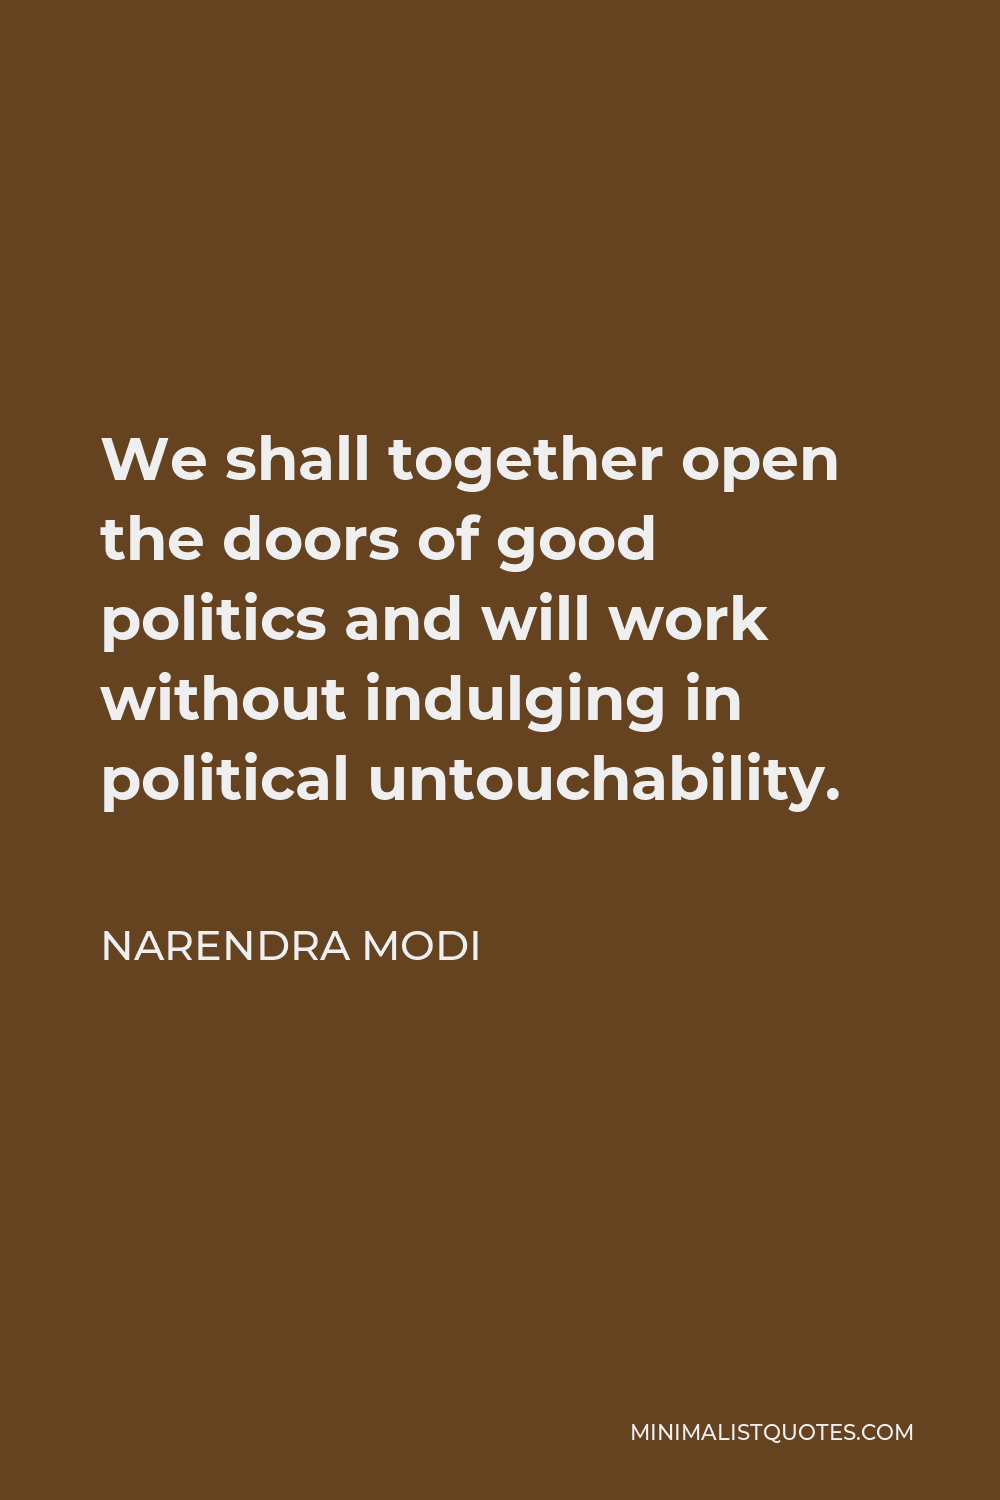 Narendra Modi Quote - We shall together open the doors of good politics and will work without indulging in political untouchability.